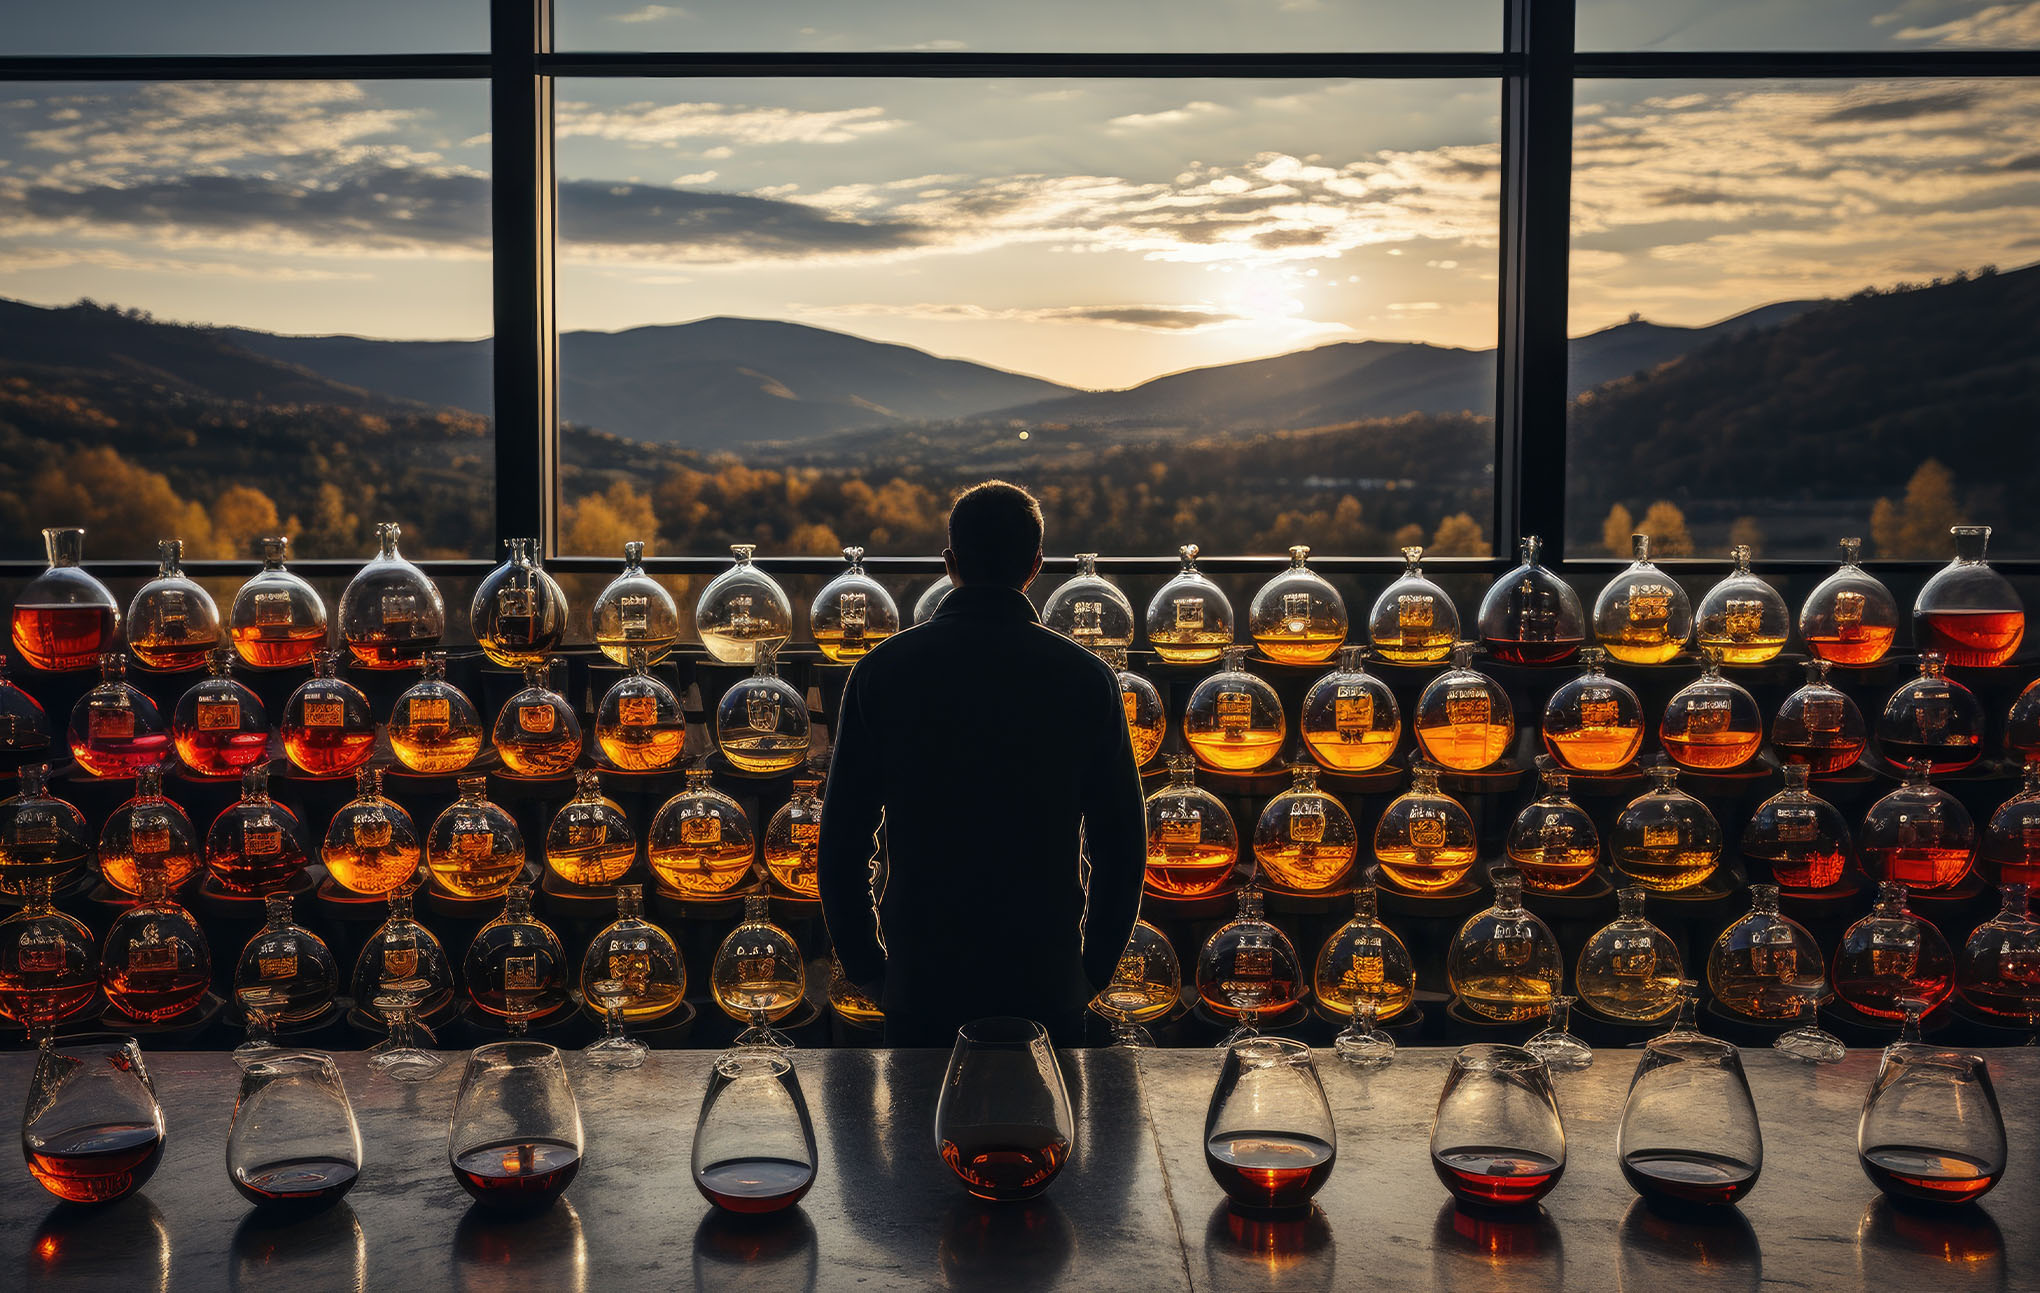 A man stands at a table lined with rows of brandy snifters, each containing varying shades of amber liquid. he faces a large window showing a picturesque sunset over rolling hills. the scene is warmly lit by the setting sun, creating a serene atmosphere.